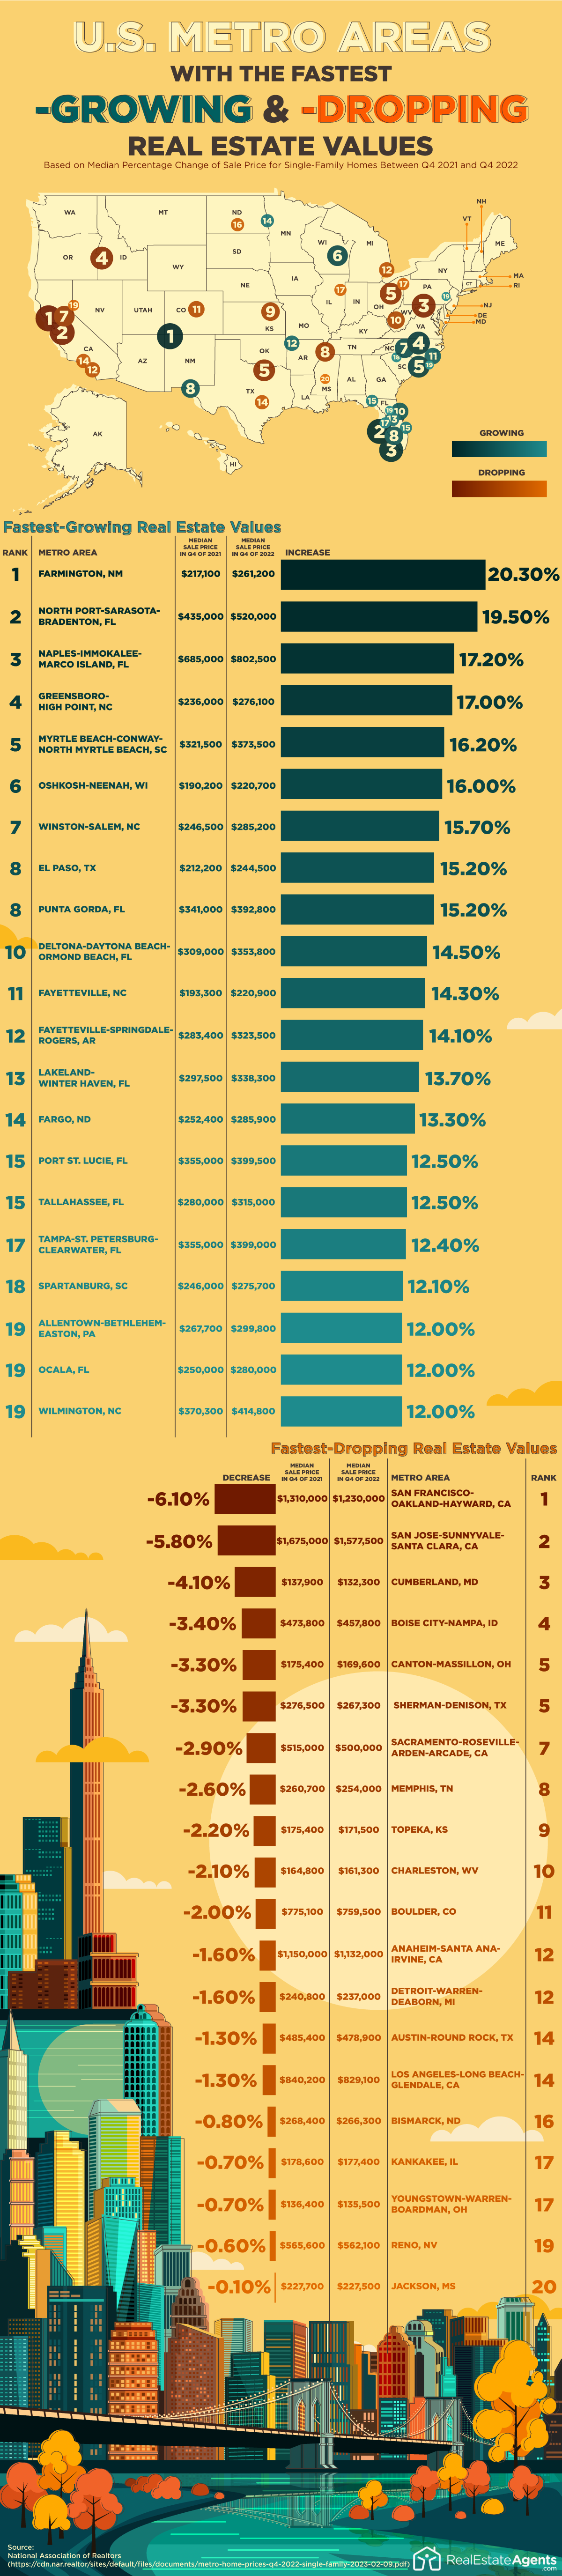 Cities With the Fastest Growing and Dropping Real Estate Values